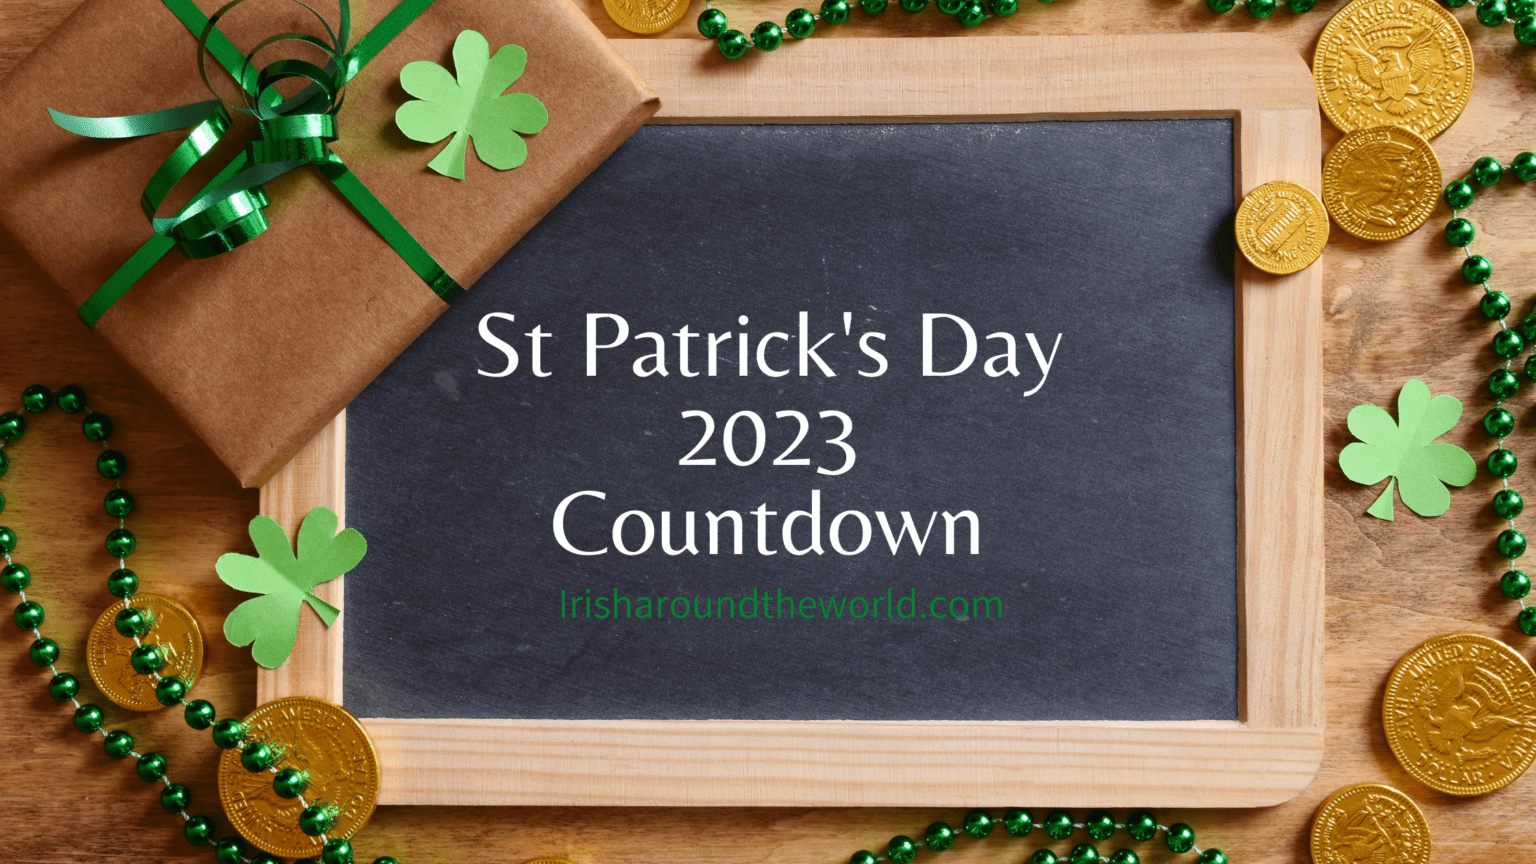 St Patrick's Day 2023 Countdown Image